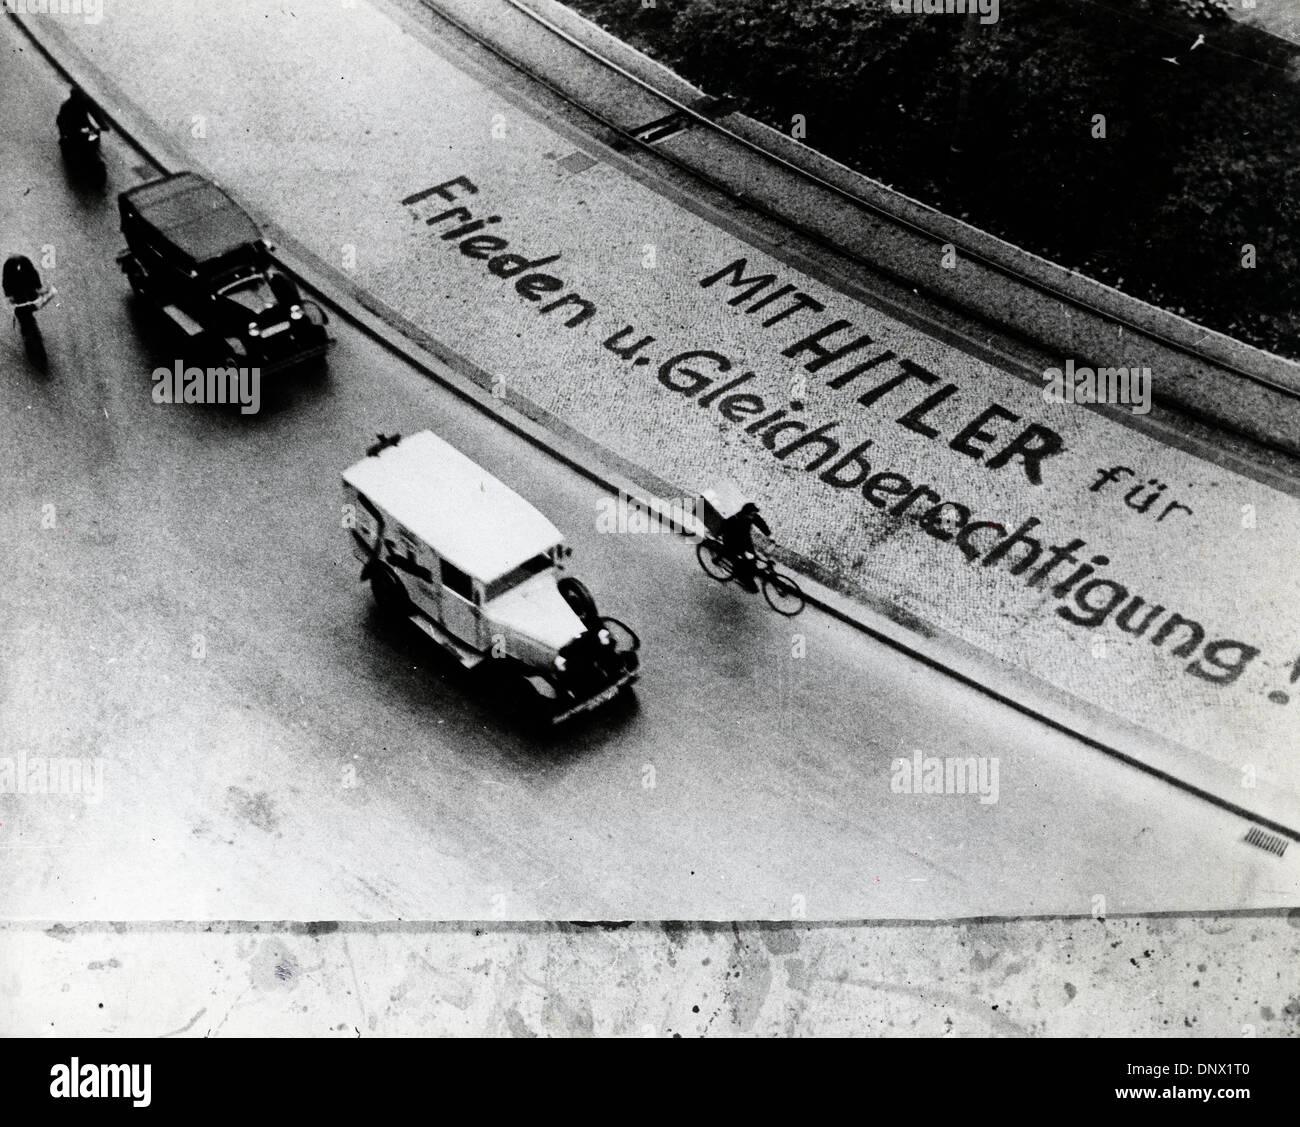 Oct. 25, 1933 - Berlin, Germany - Propaganda for the German Nazi Party on the pavement in Berlin. (Credit Image: © KEYSTONE Pictures USA/ZUMAPRESS.com) Stock Photo